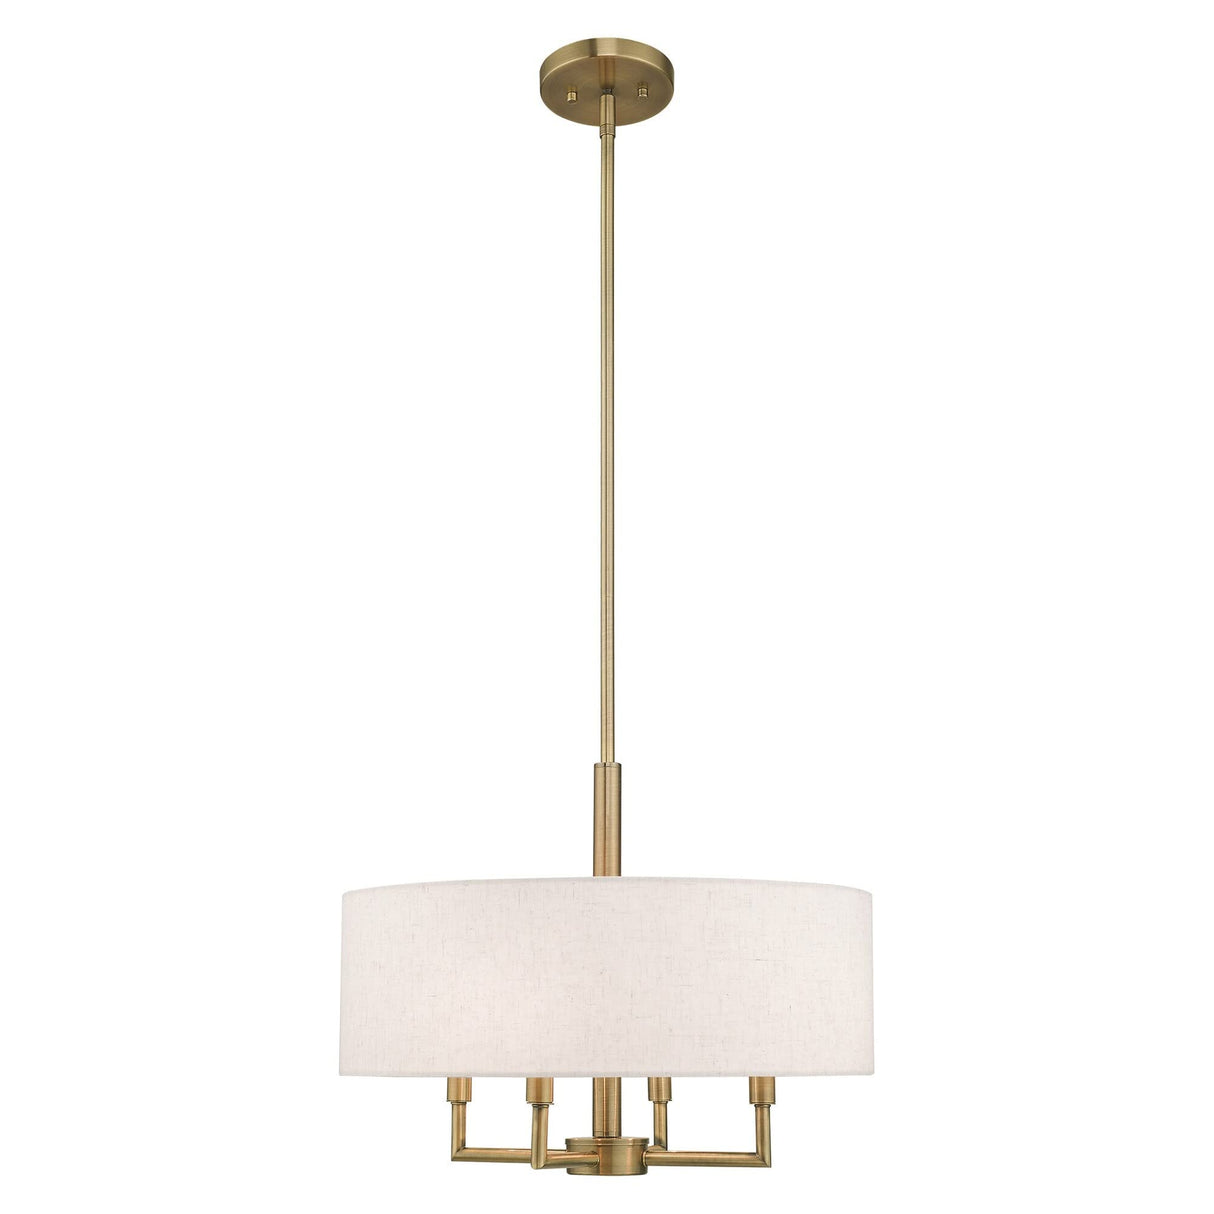 Livex Lighting 42604-91 Meridian - Four Light Chandelier, Brushed Nickel Finish with Oatmeal Fabric Shade